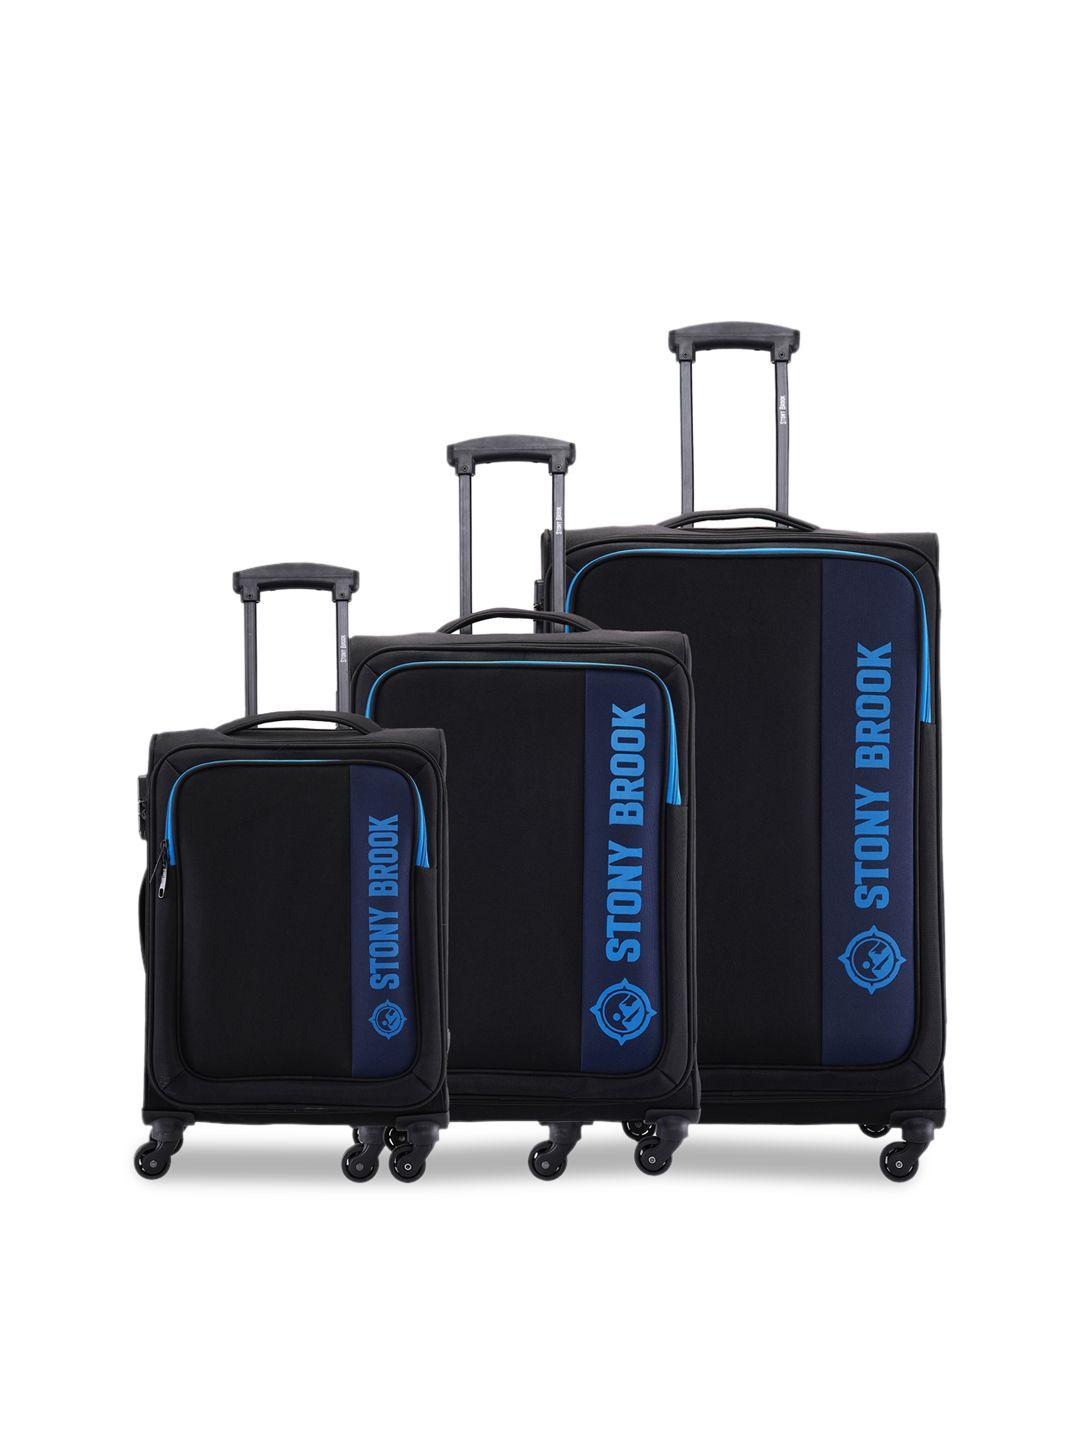 stony brook by nasher miles set of 3 brand logo printed soft-sided trolley suitcases